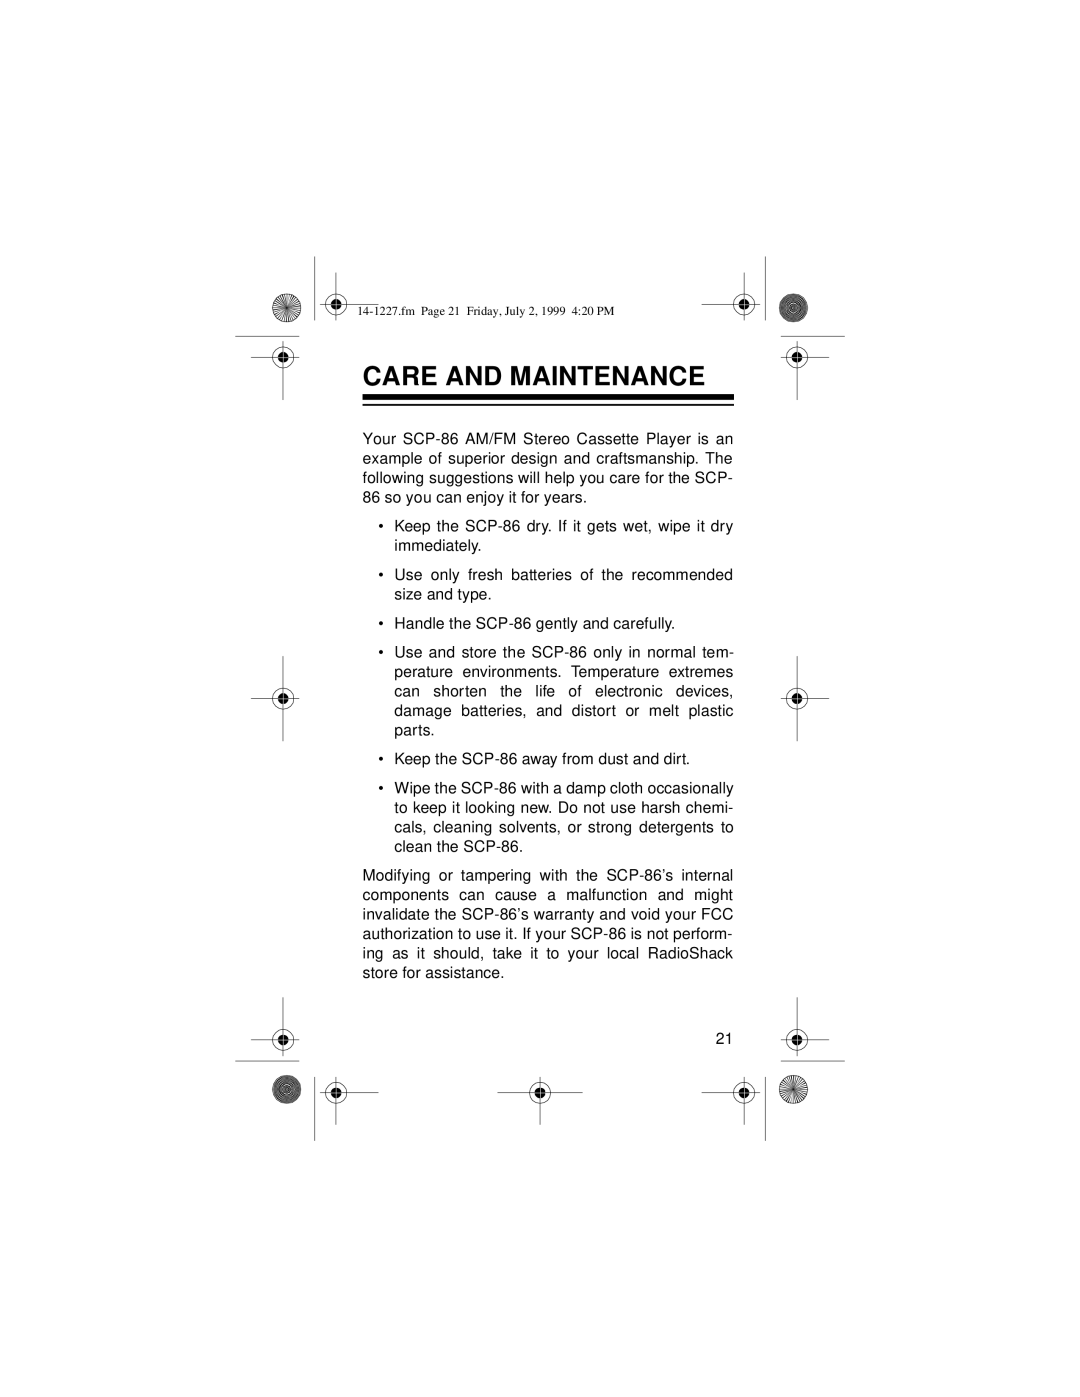 Optimus SCP-86 owner manual Care And Maintenance 